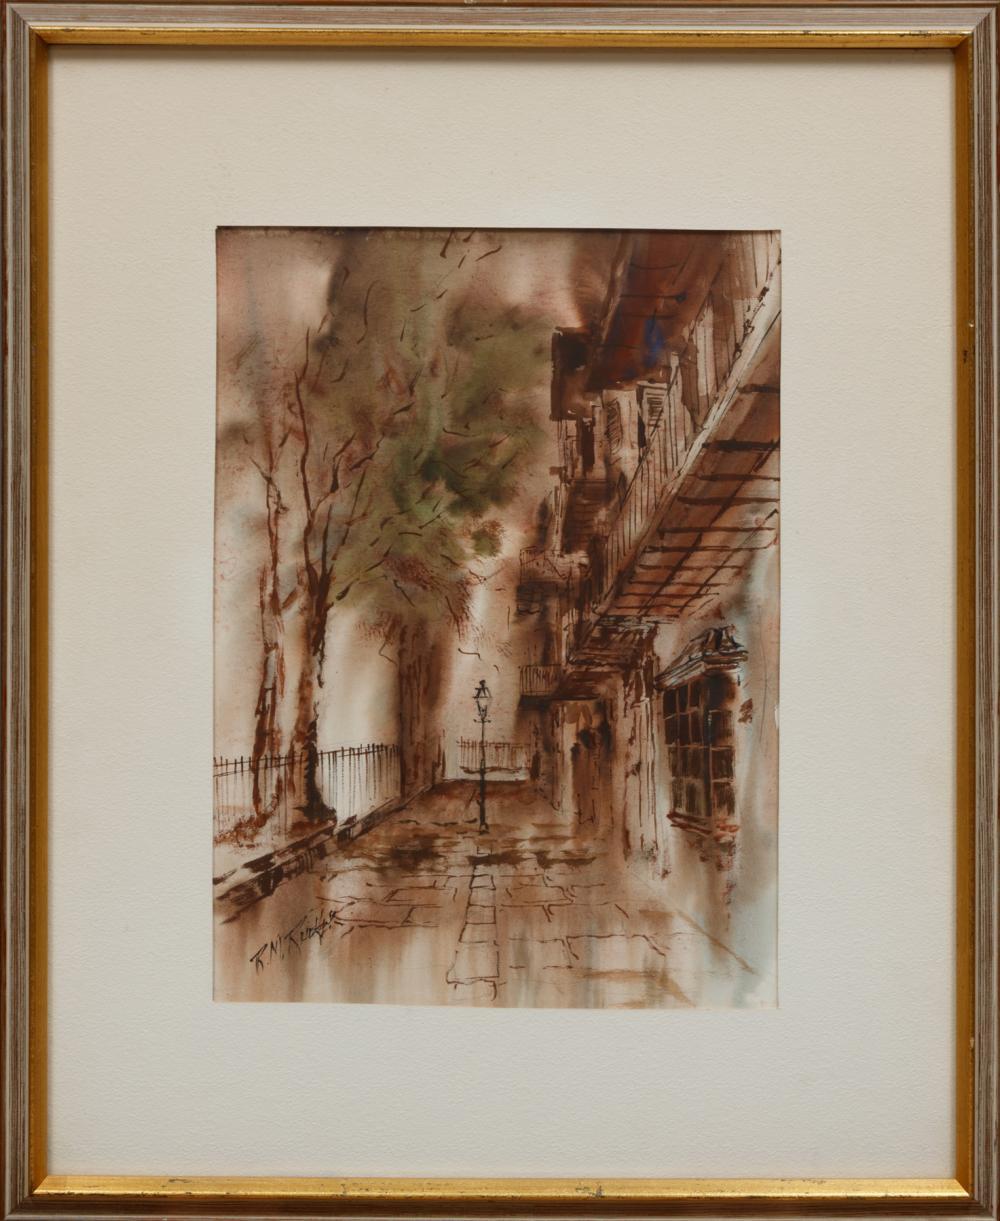 A framed watercolor and graphite on board by one of the stalwarts of New Orleans and Louisiana art and denizen of the French Quarter, of a subject near and dear to everyone who loves the Big Easy. Framed size 22.5" x 18", actual watercolor is 14.75"